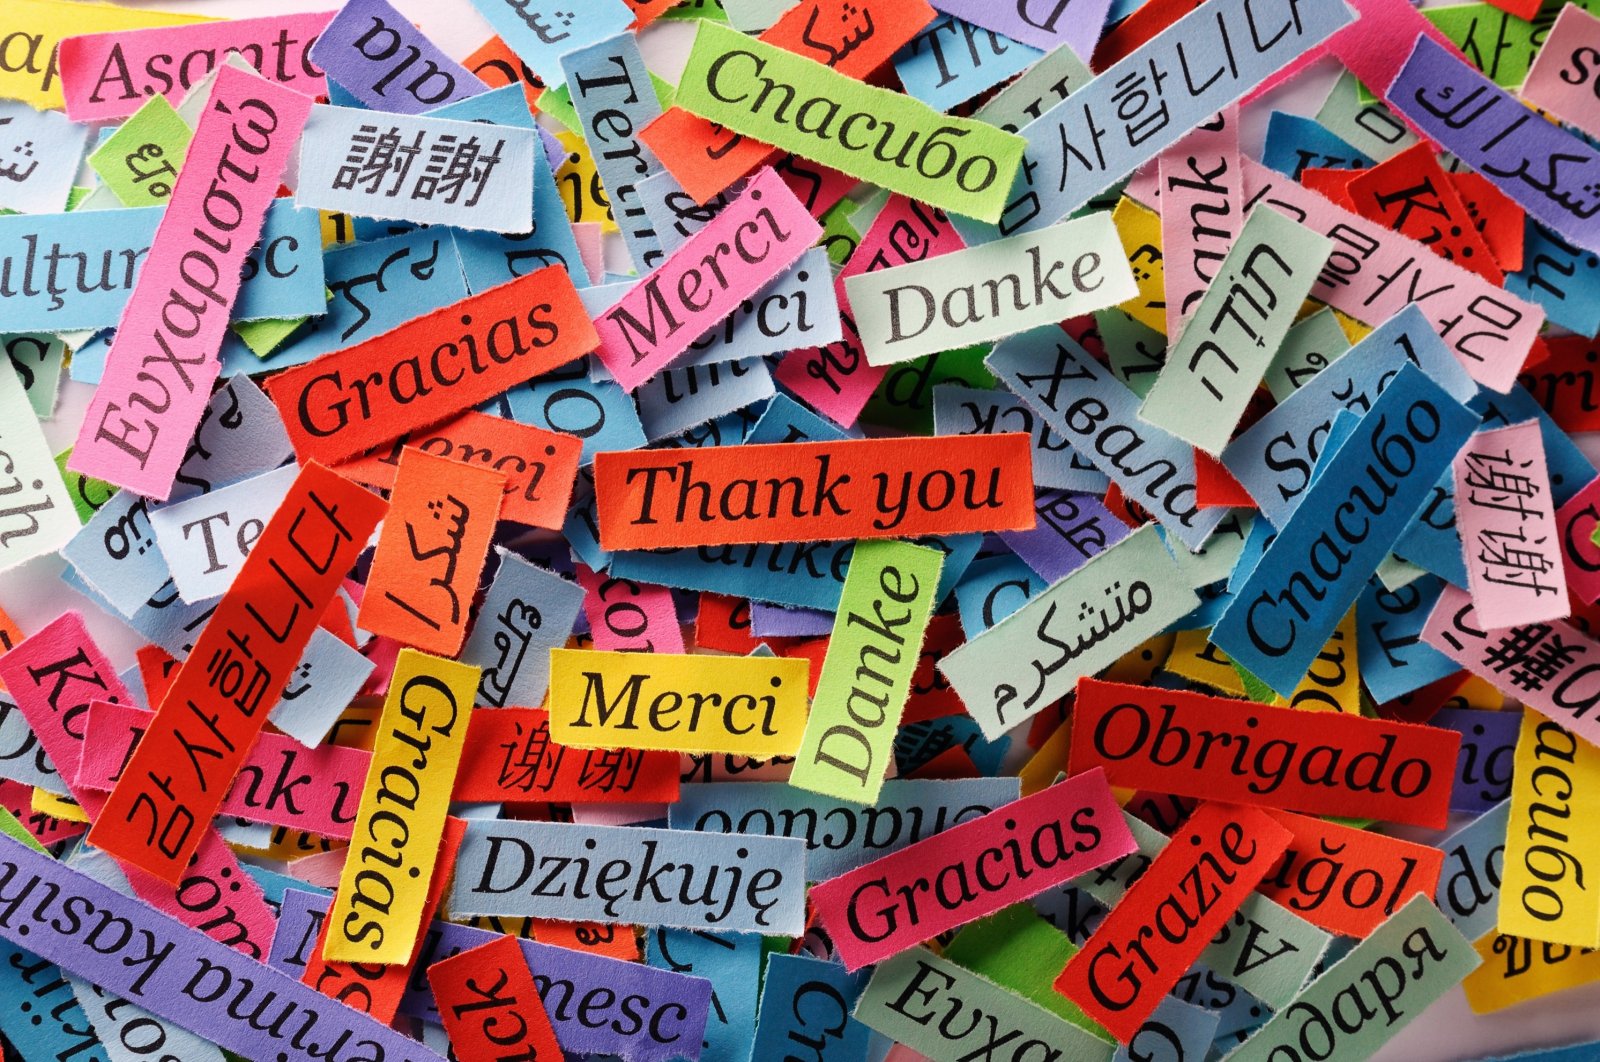 The phrase “Thank You” printed on colorful papers in different languages. (Shutterstock Photo)